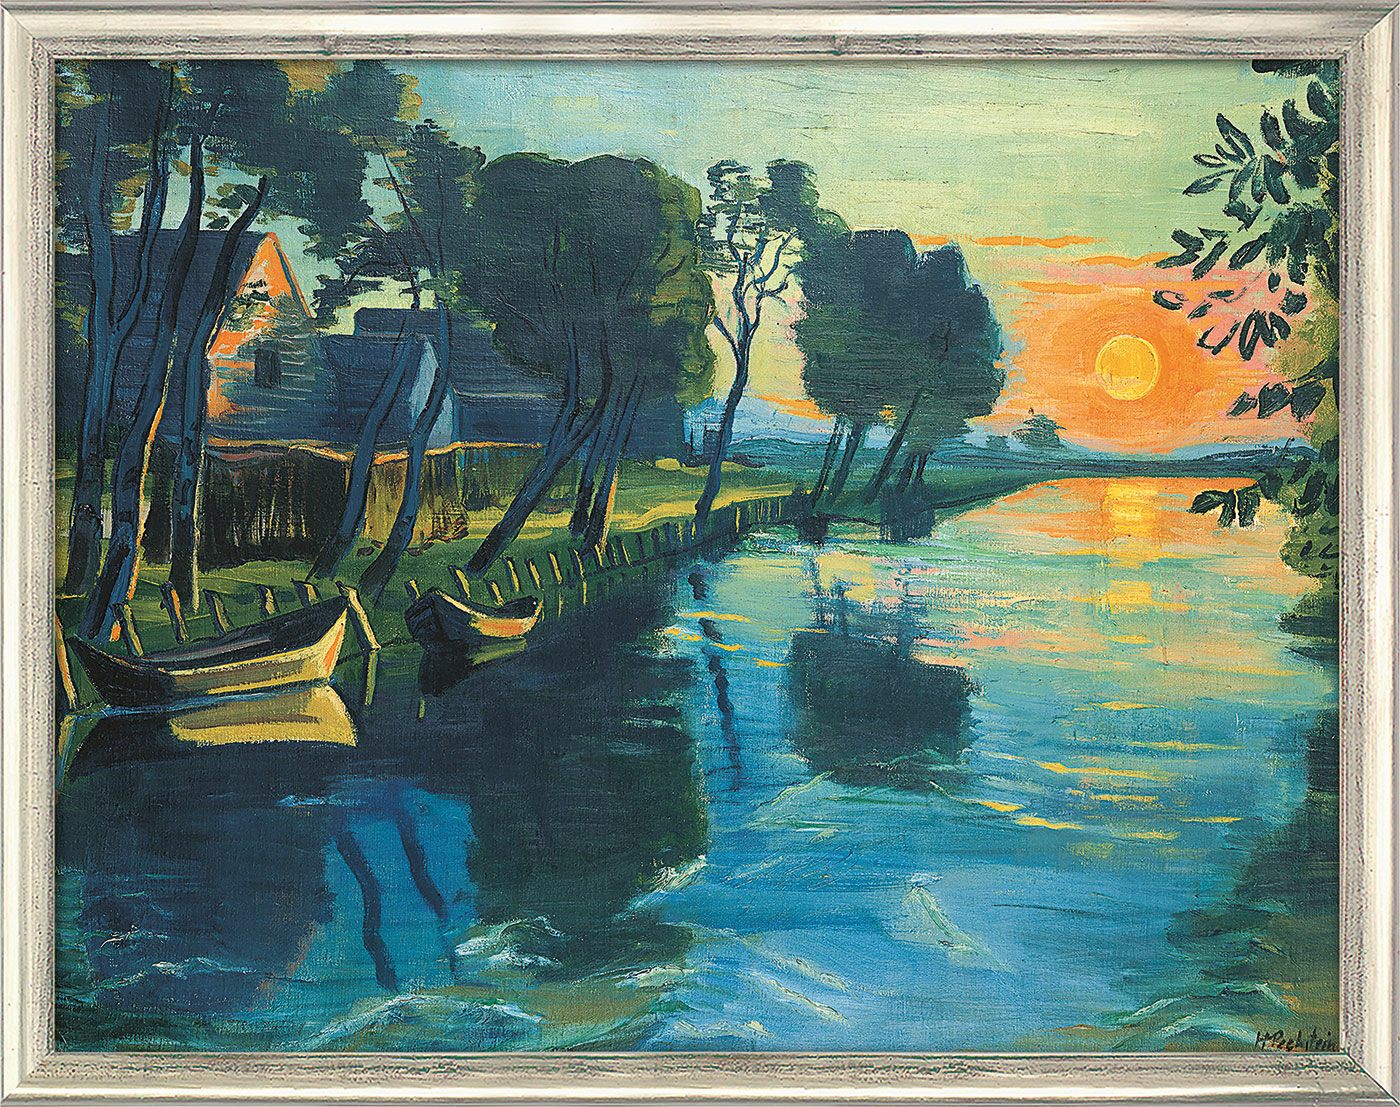 Picture "The First Rays of Sunshine on the Millrace" (c. 1934), silver-coloured framed version by Max Pechstein